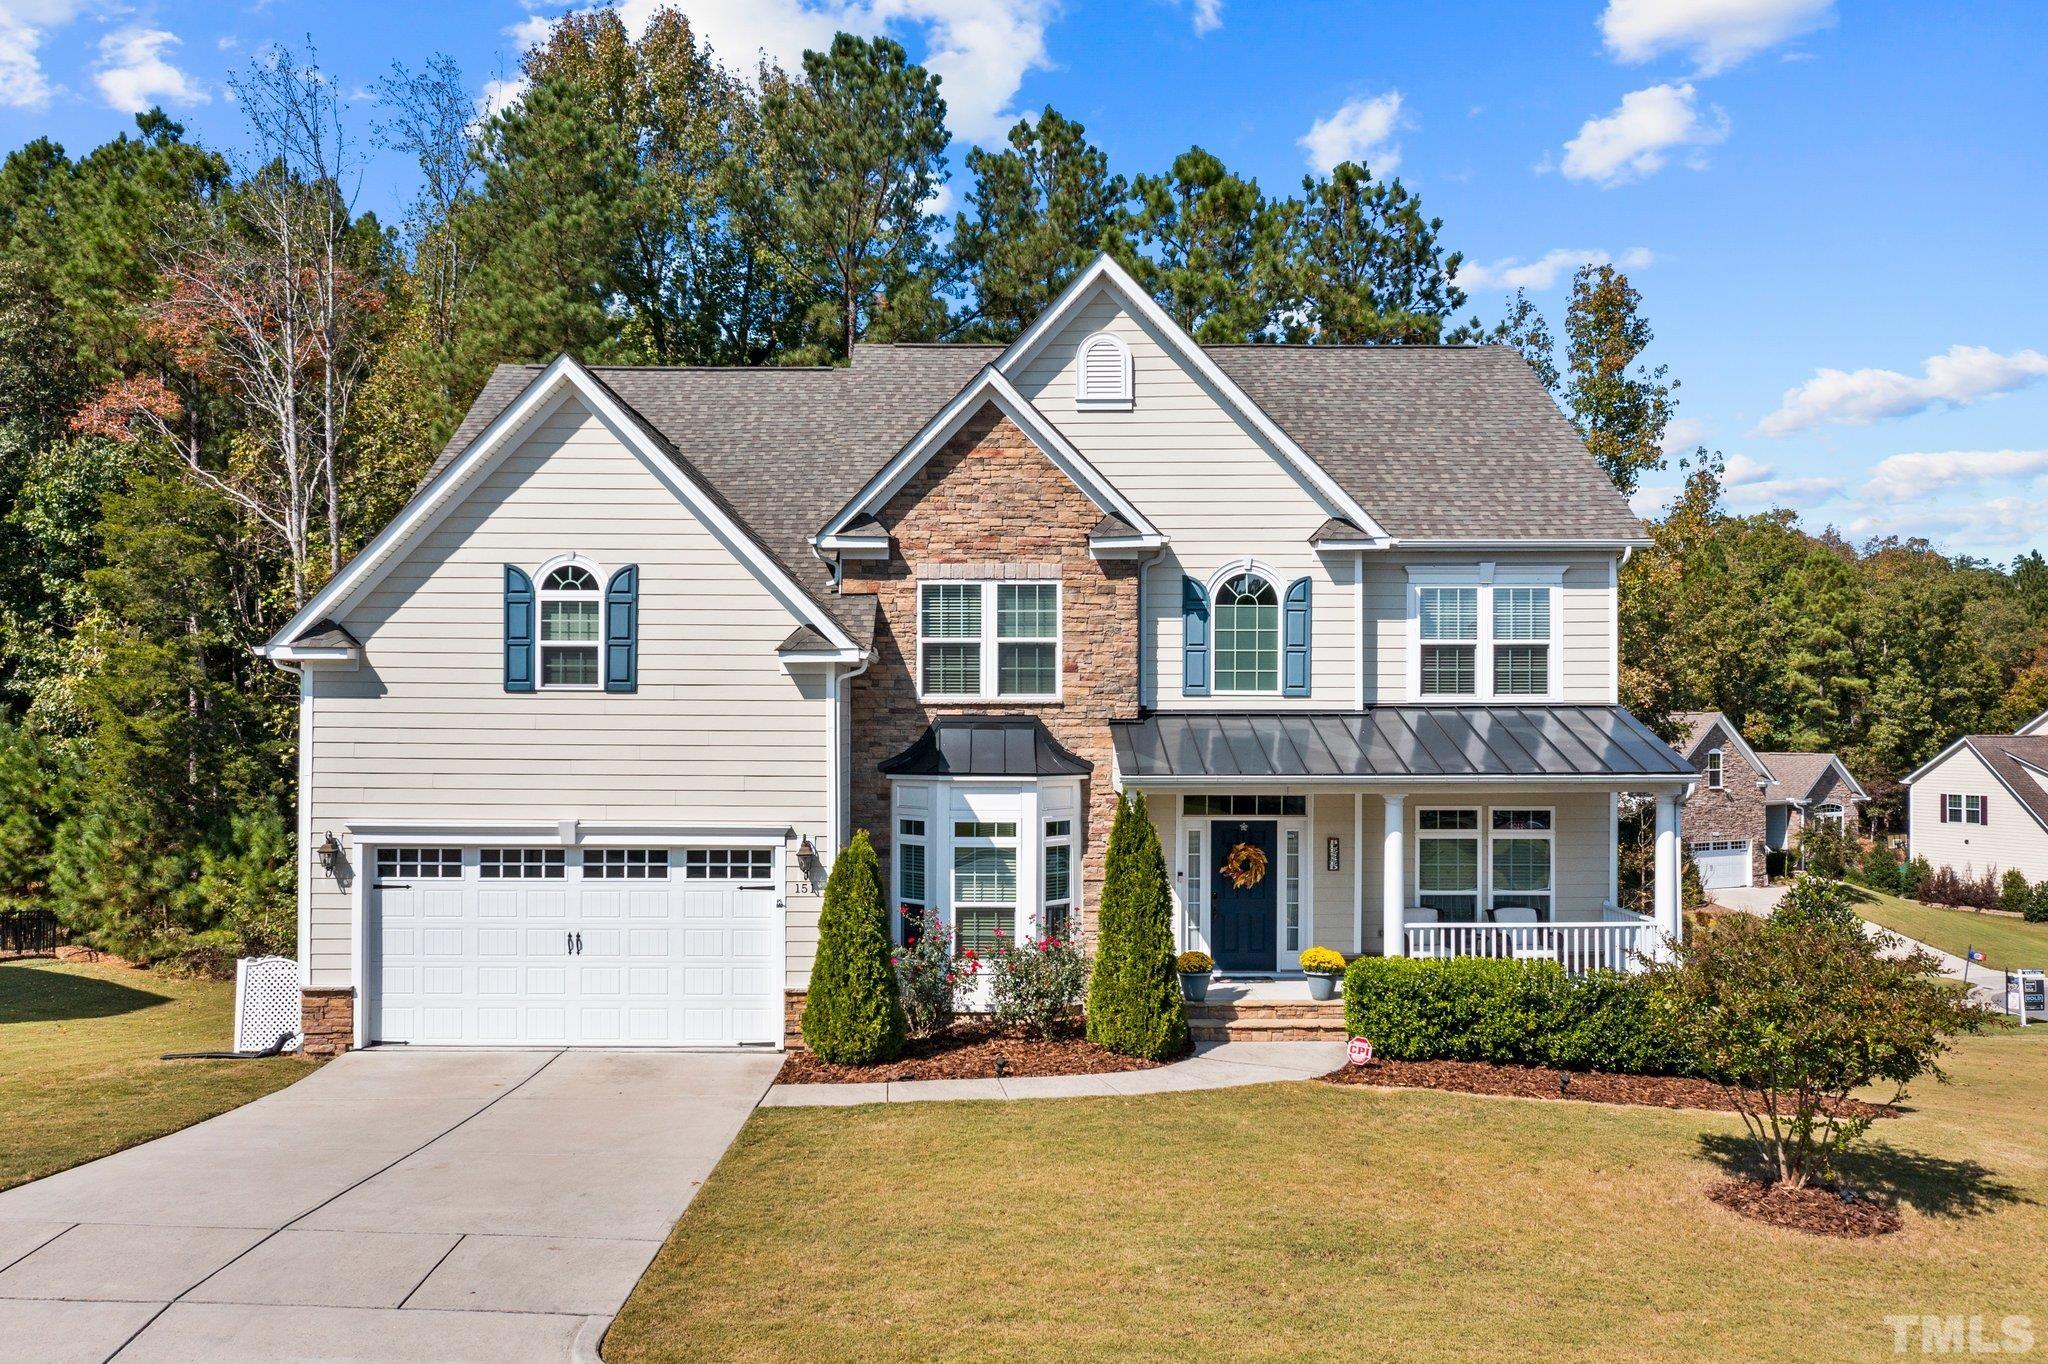 Welcome to 151 S Farnleigh Drive in the Woodlands at Westfall Village.